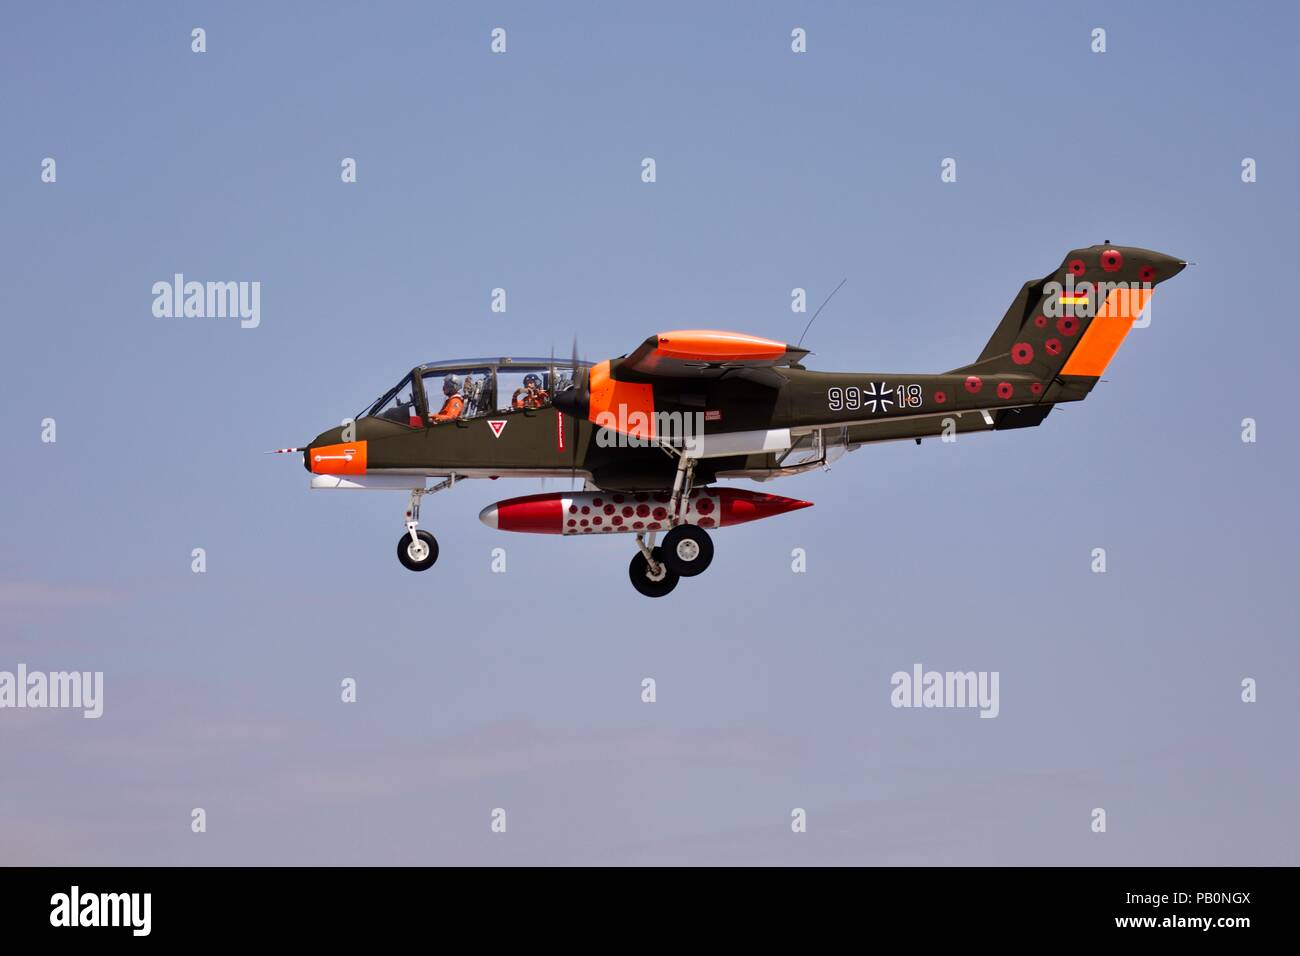 North American Rockwell OV-10 Bronco arriving at the 2018 Royal International Air Tattoo Stock Photo